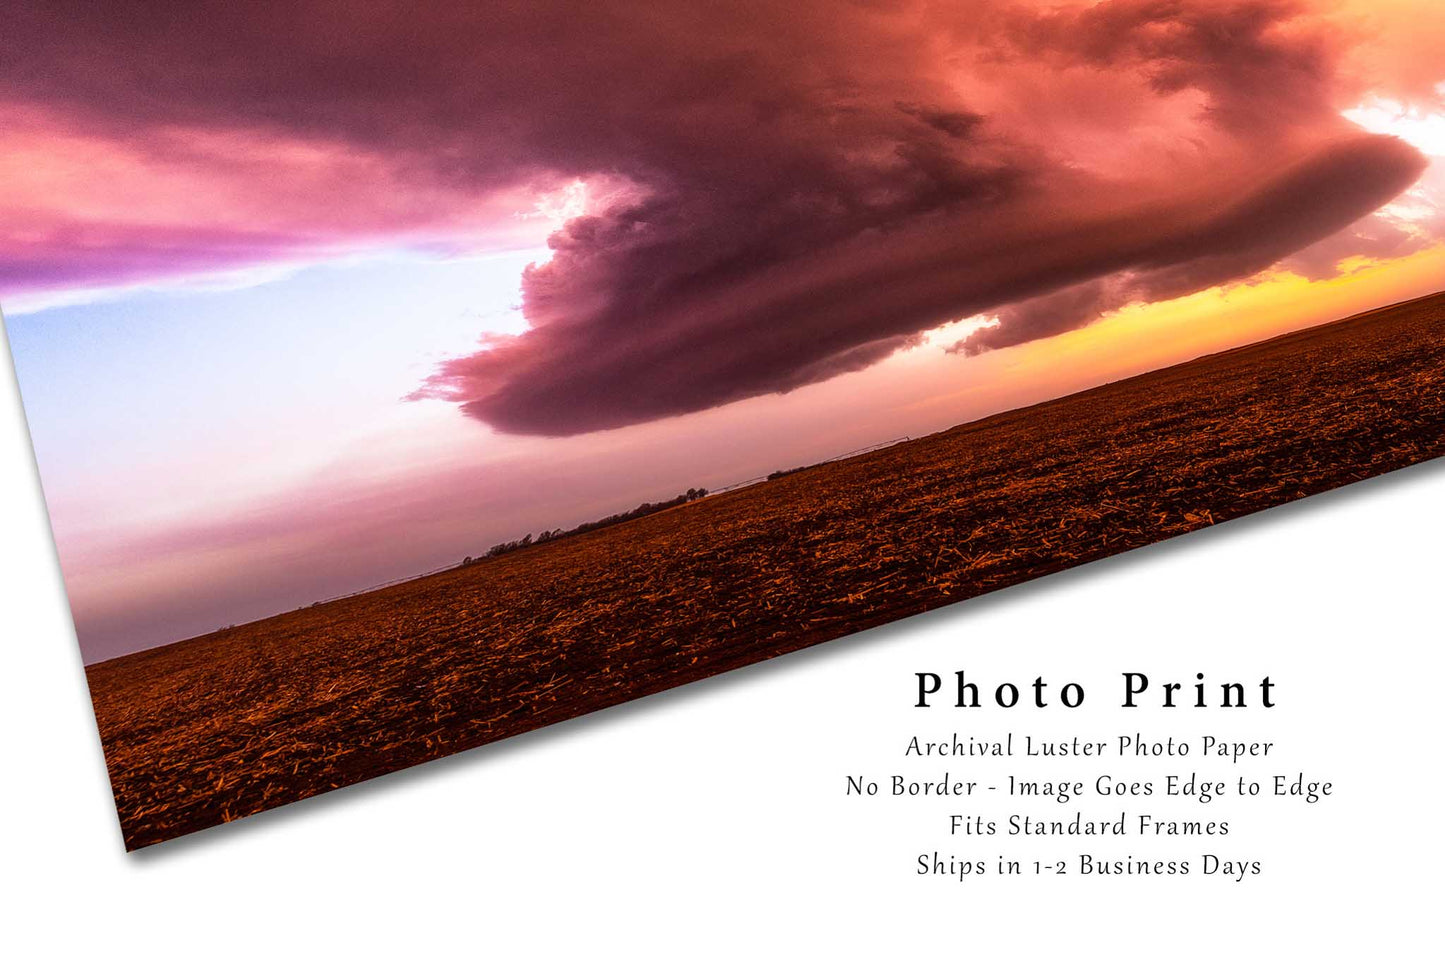 Storm Photography Print (Not Framed) Picture of Supercell Thunderstorm with Red Hue Over Open Field at Sunset on Stormy Spring Evening in Kansas Weather Wall Art Nature Decor